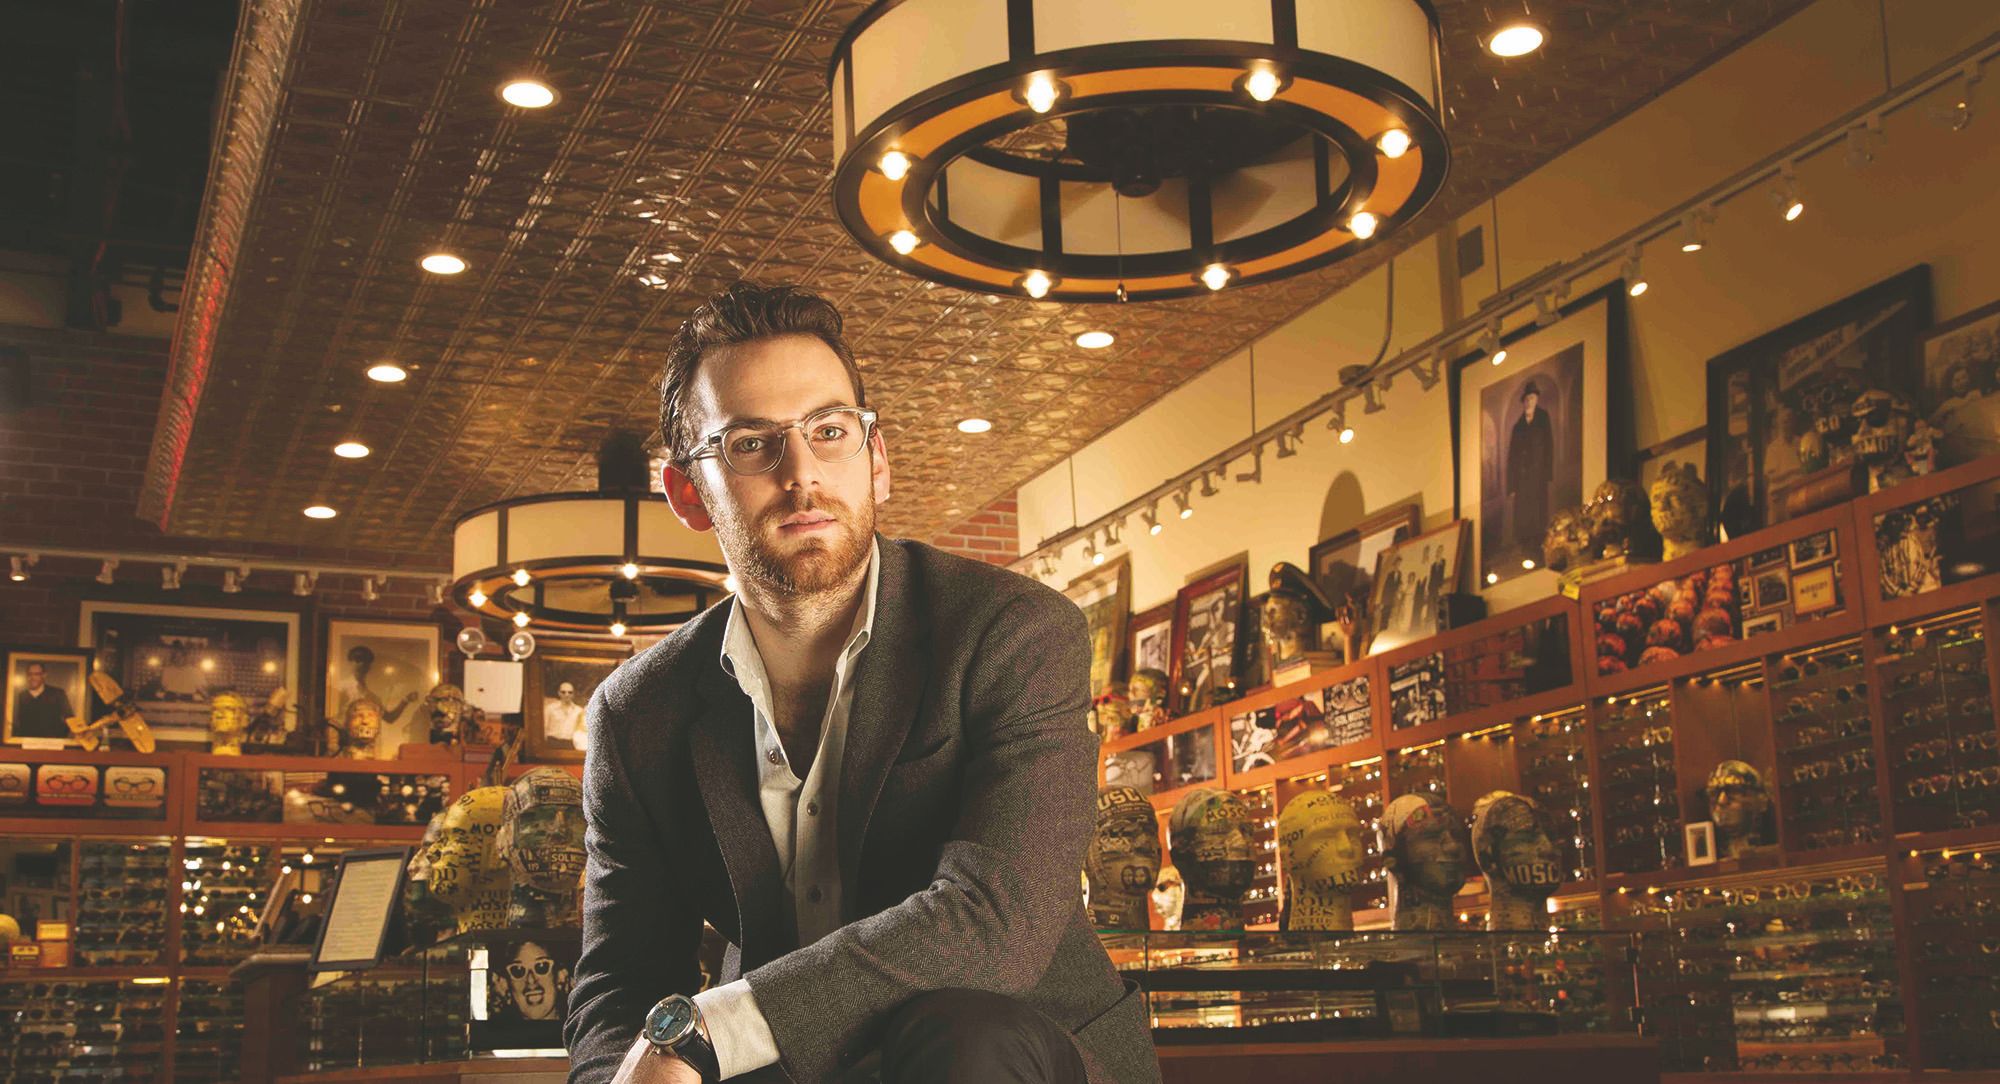 Crain's New York Business features Zack Moscot